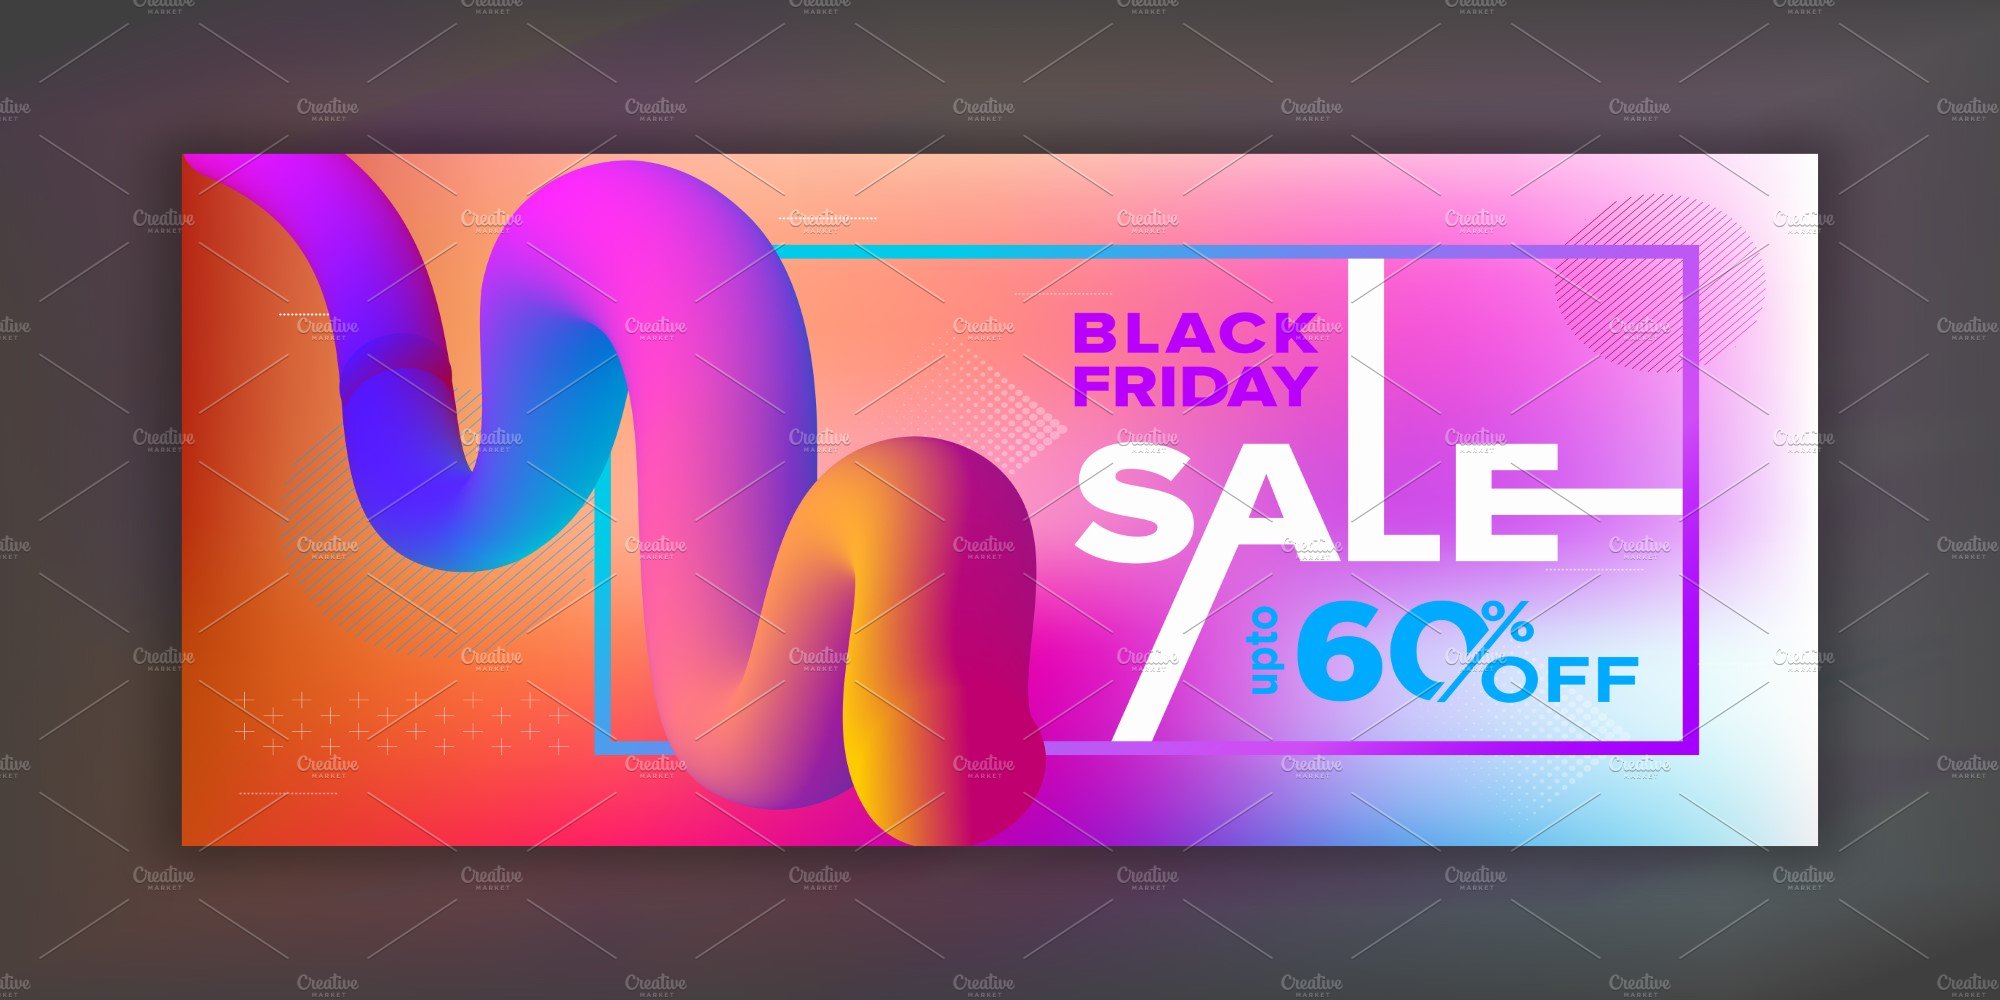 Delicate and creative Black Friday banner.